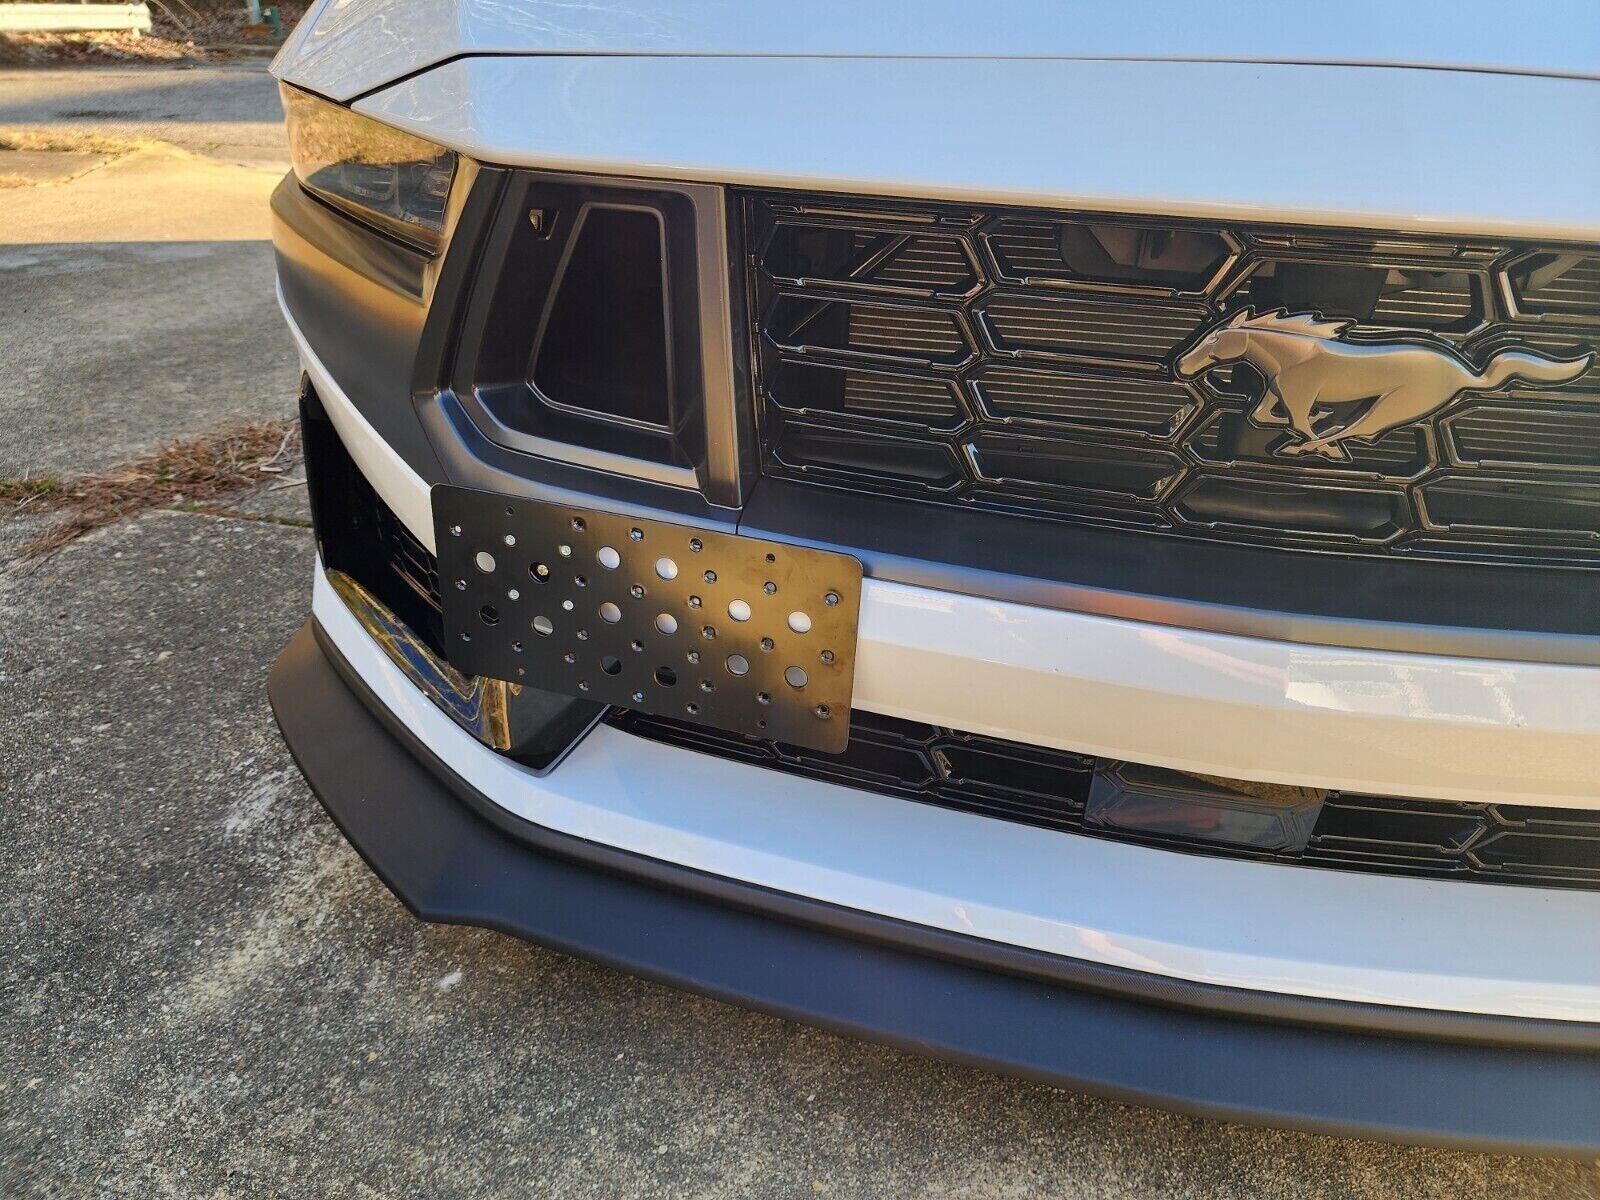 S650 Mustang Front license plate bracket - is it installed at factory or dealer Ebay License Plate